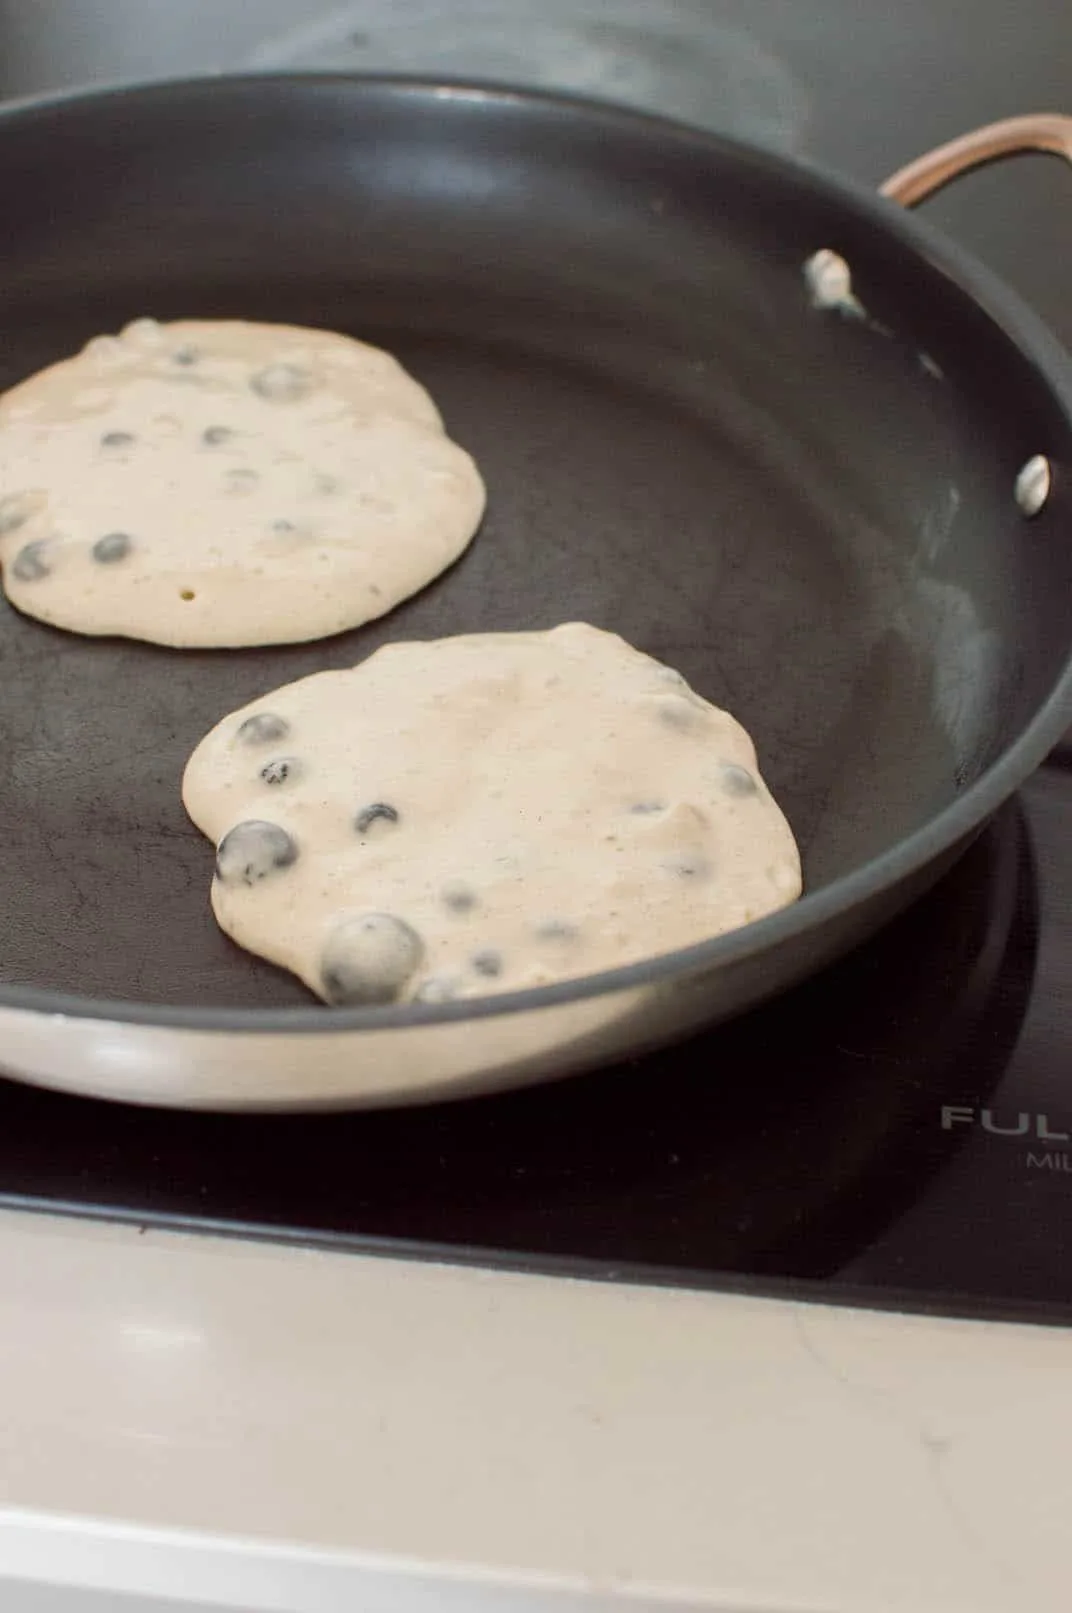 Cooking blueberry pancakes in non-stick pan